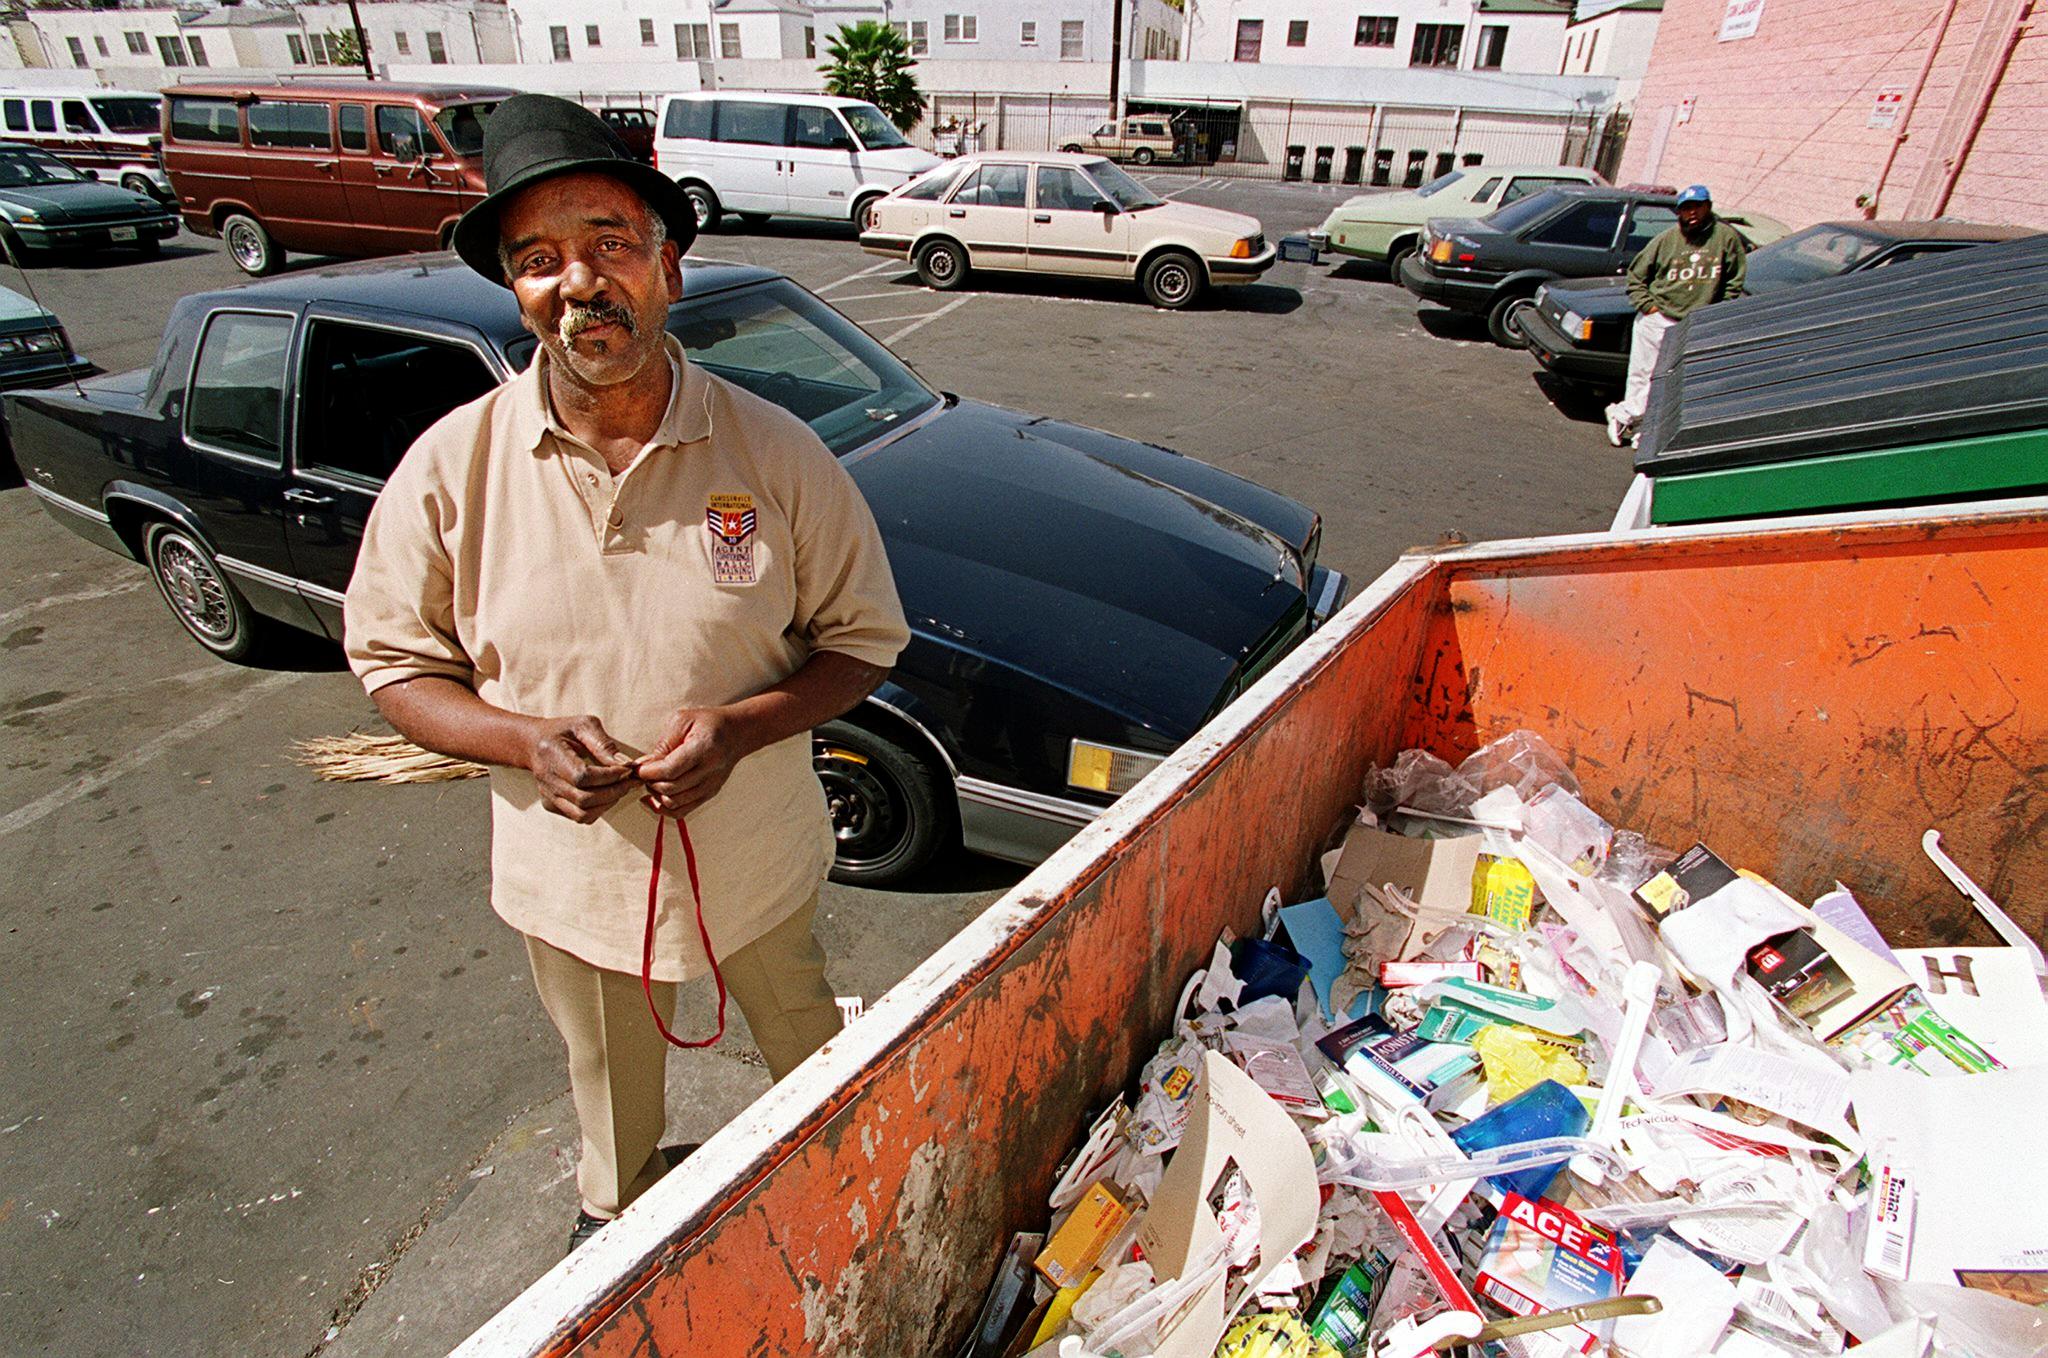 Willie Fulgear poses by the bins where he found the Oscars